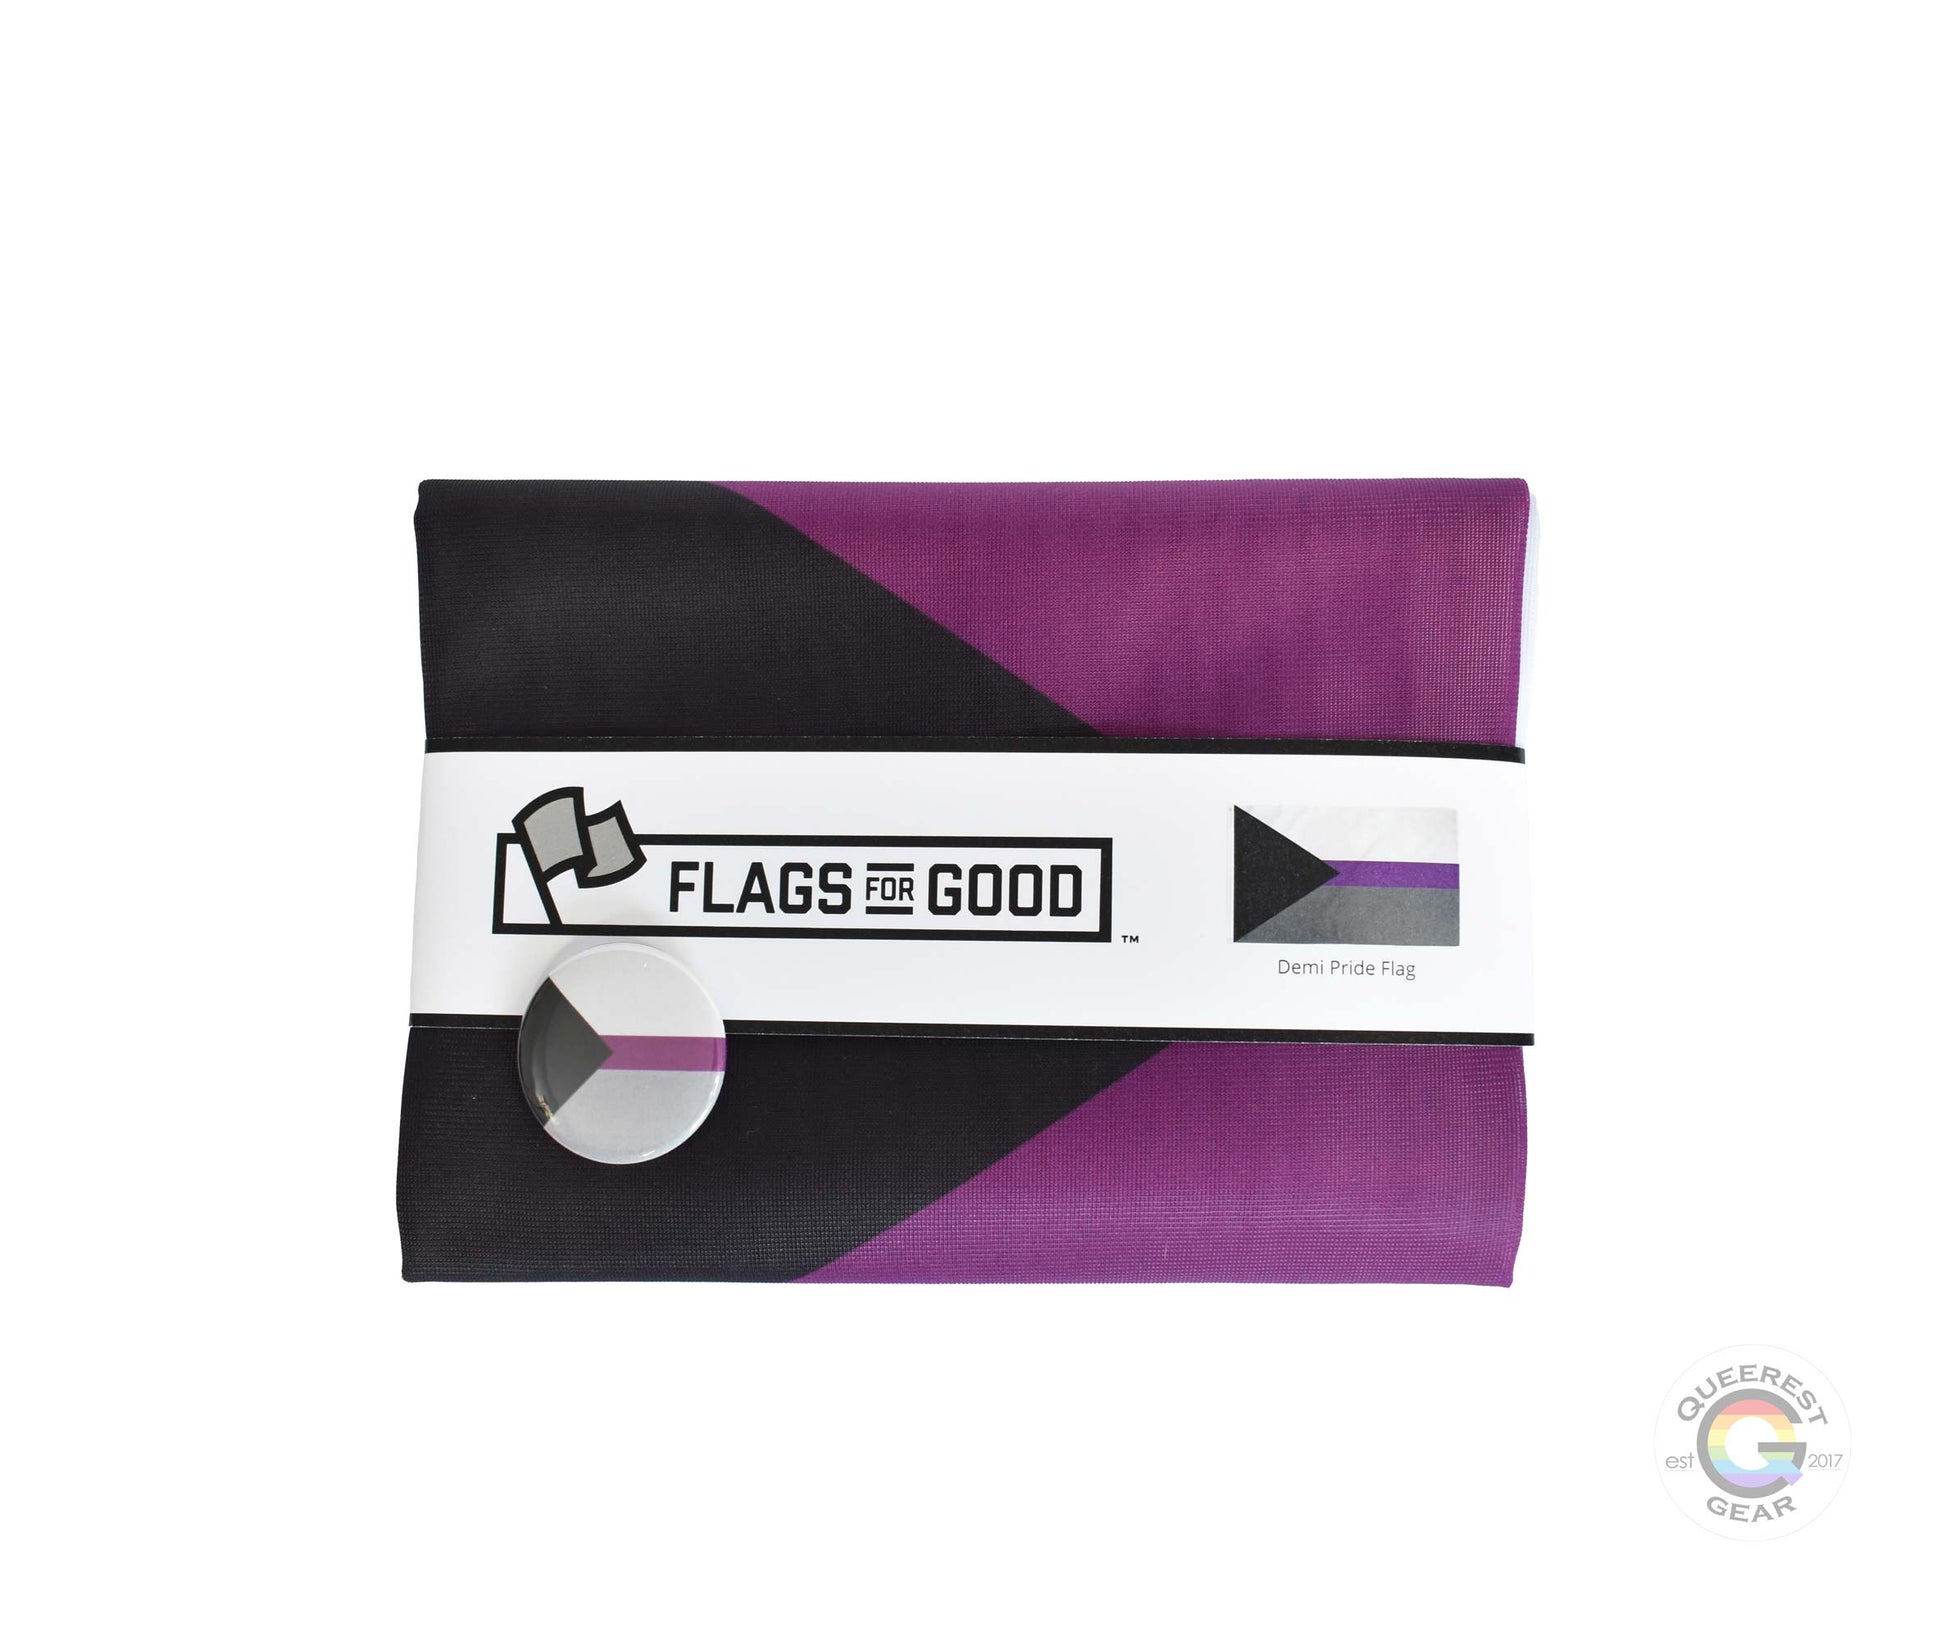  The demisexual pride flag folded in its packaging with the matching free demisexual flag button